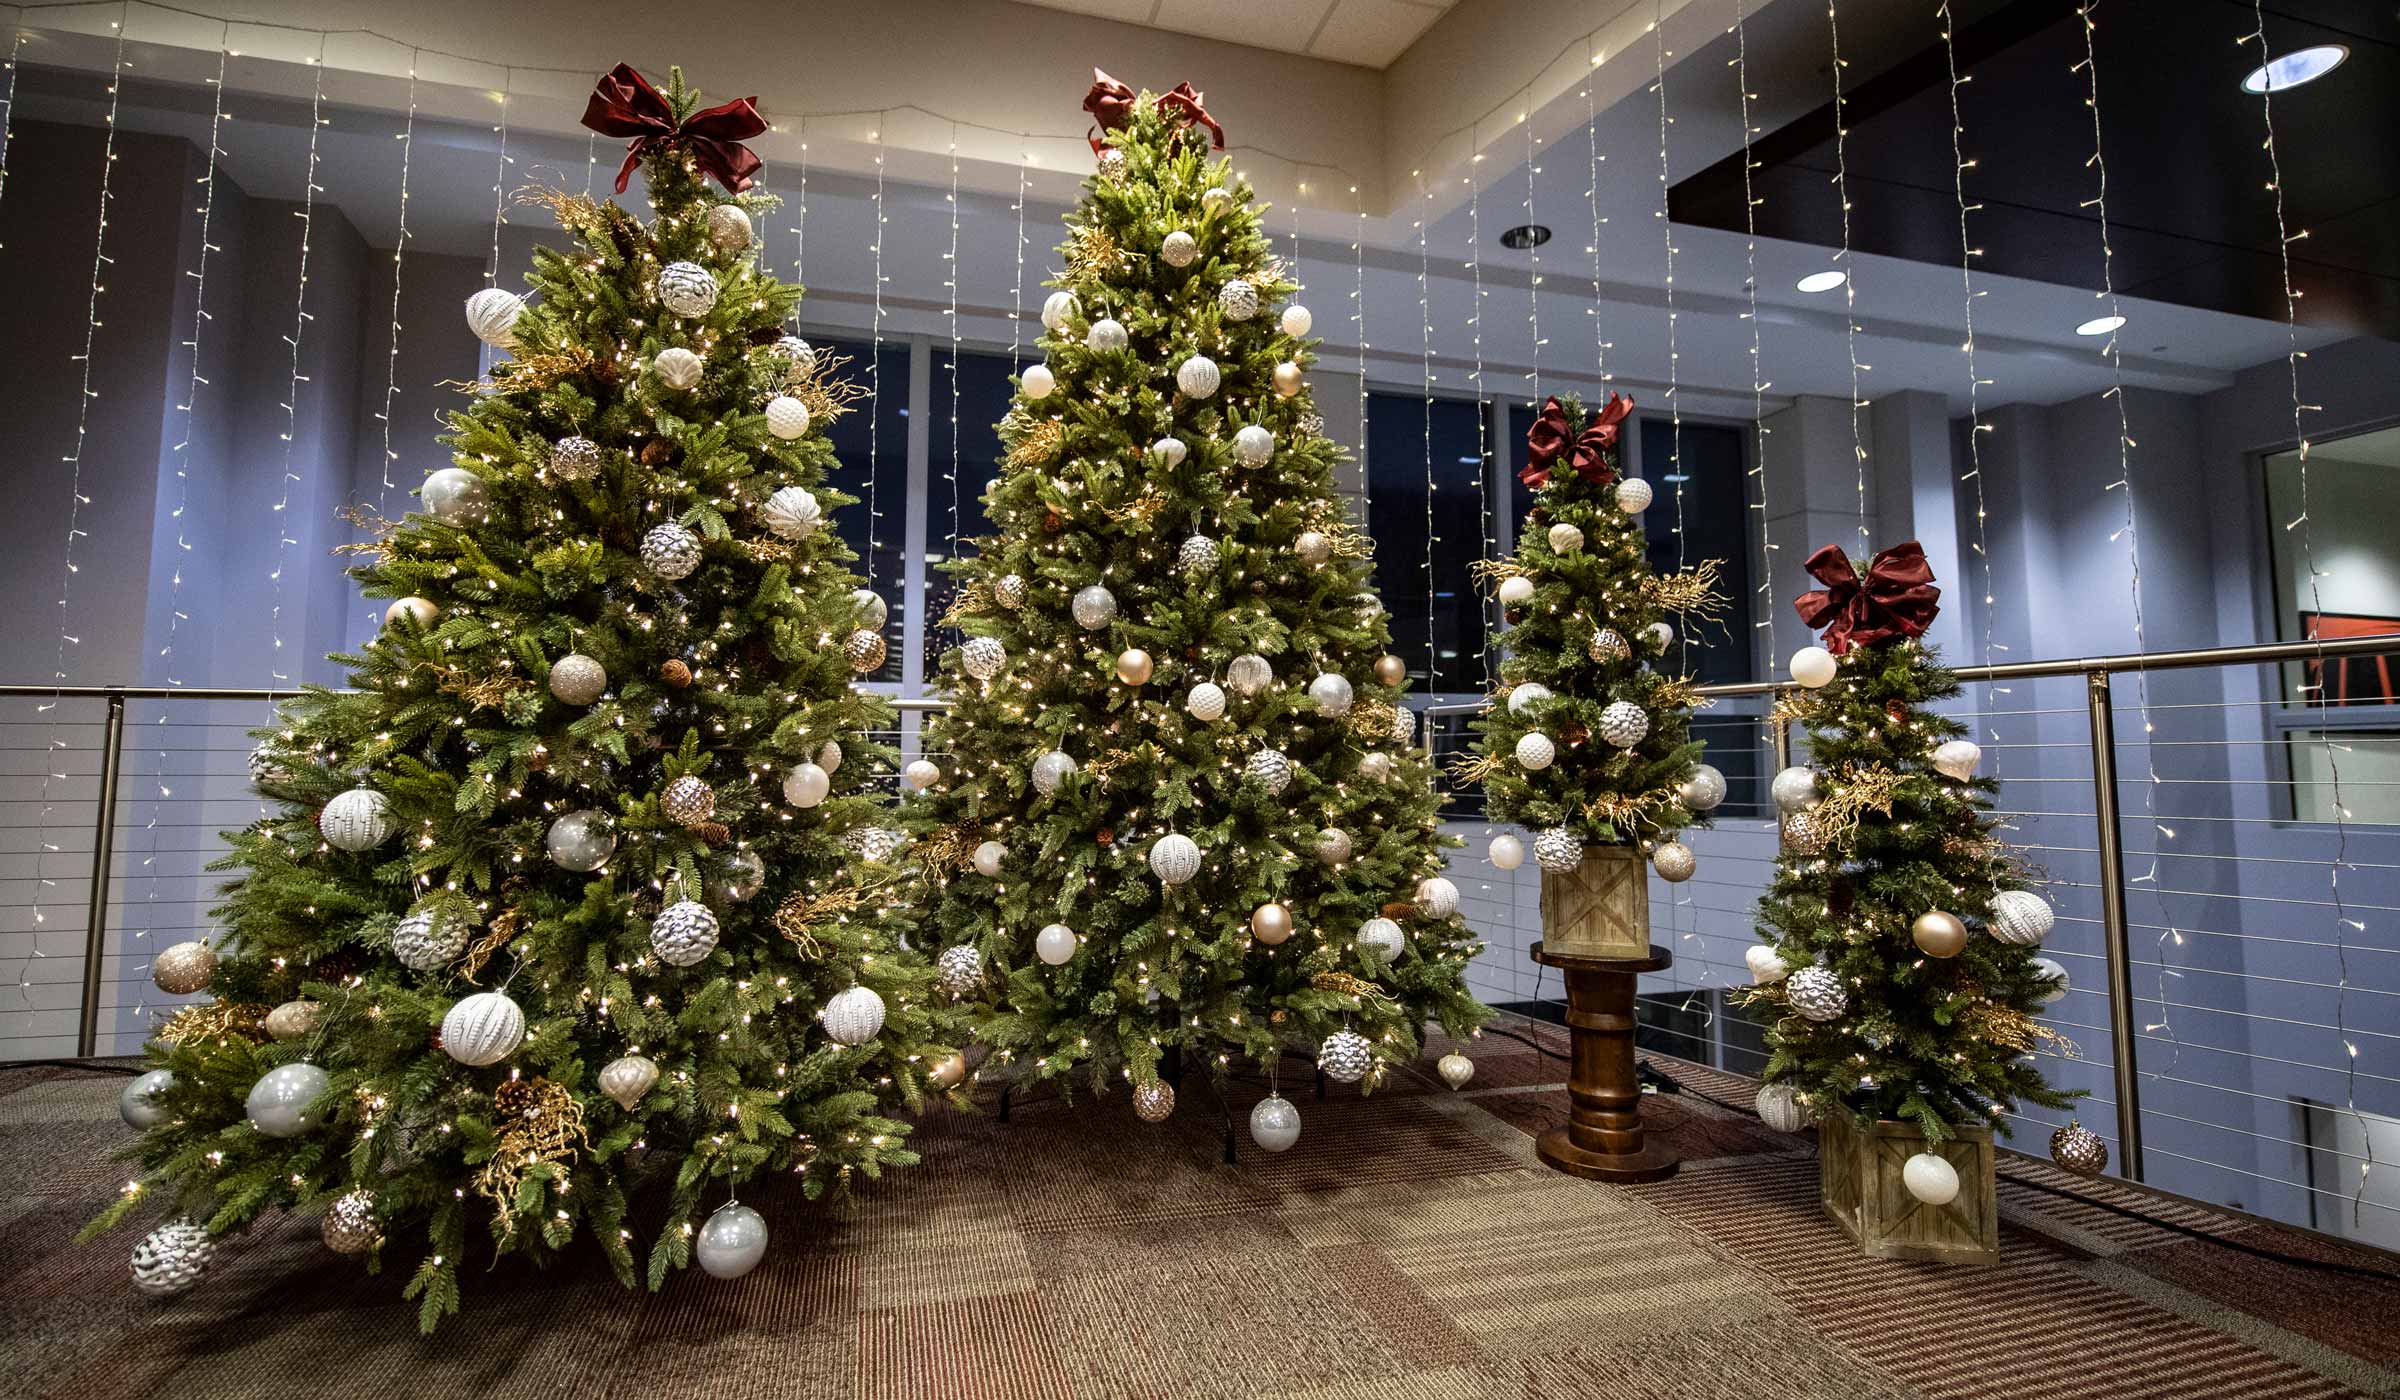 Christmas Trees in the Student Union.